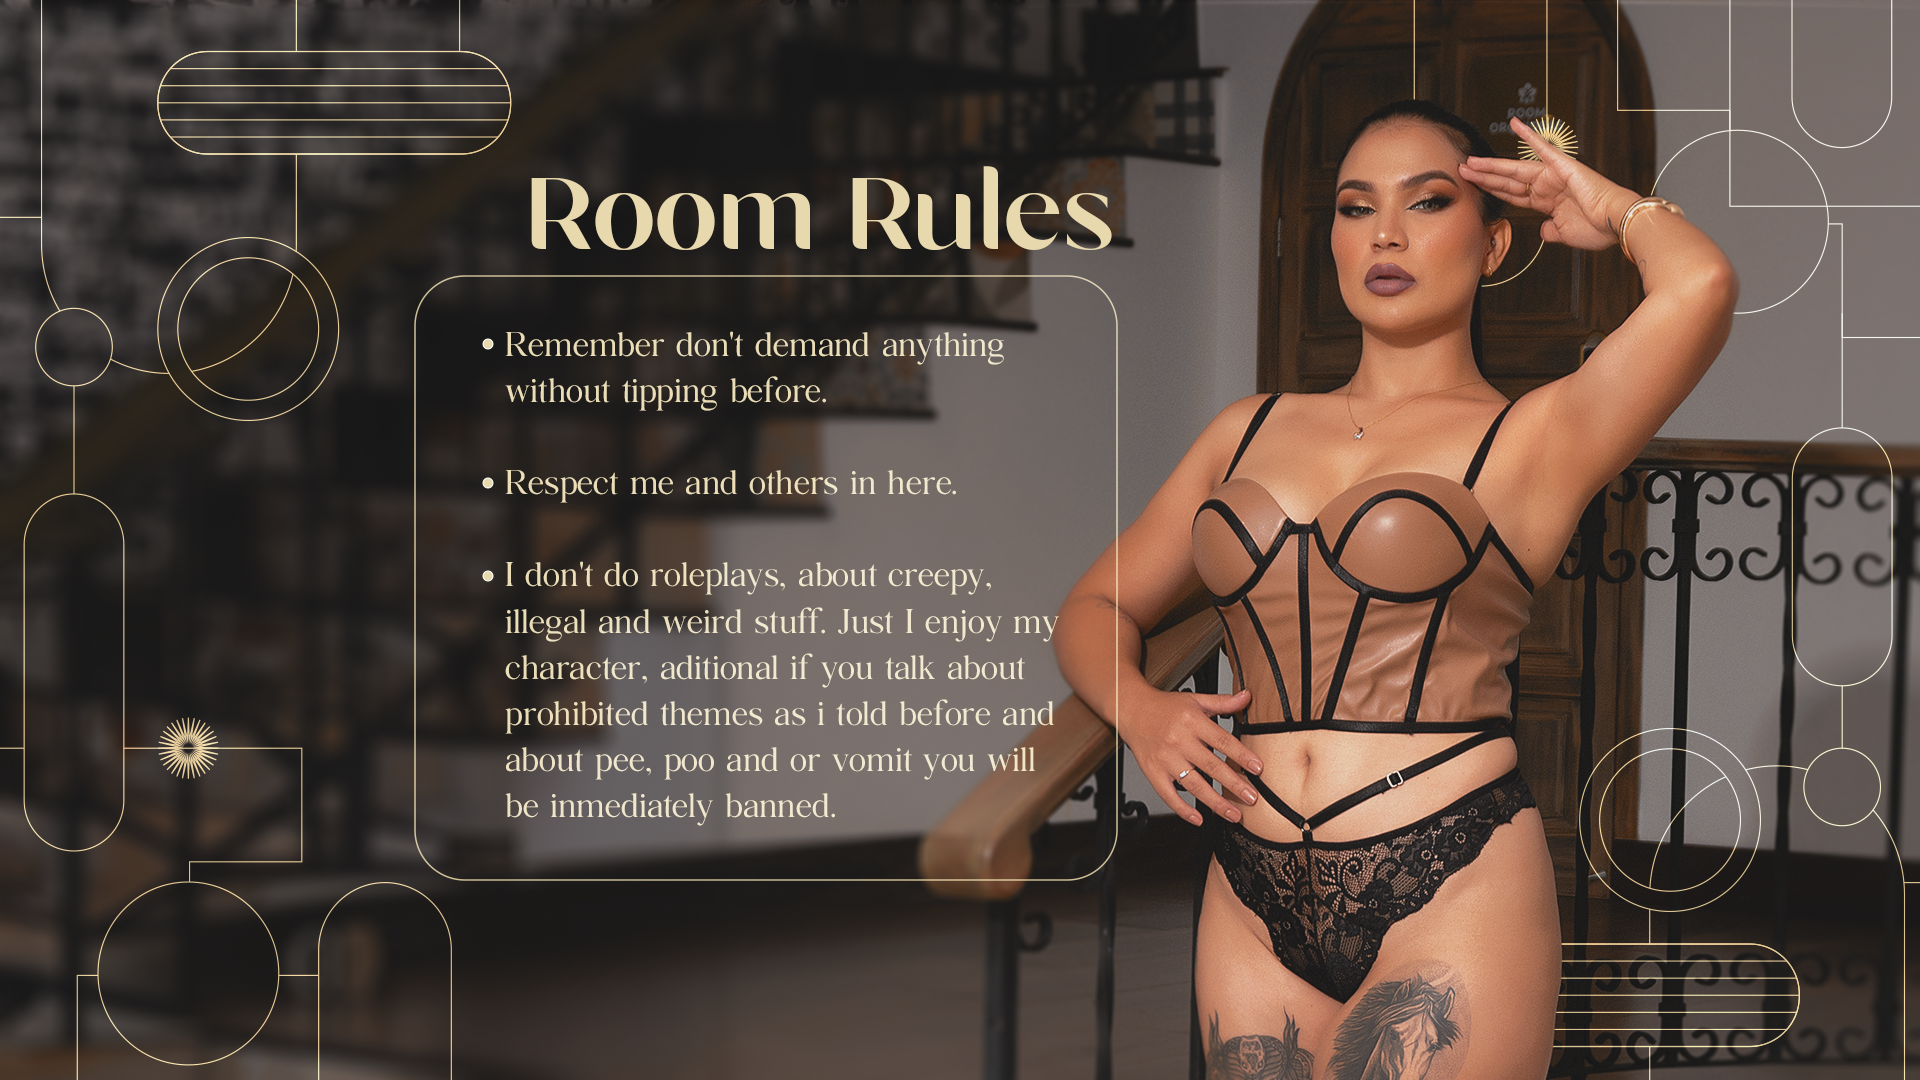 CameronCarter1 Room Rules image: 1